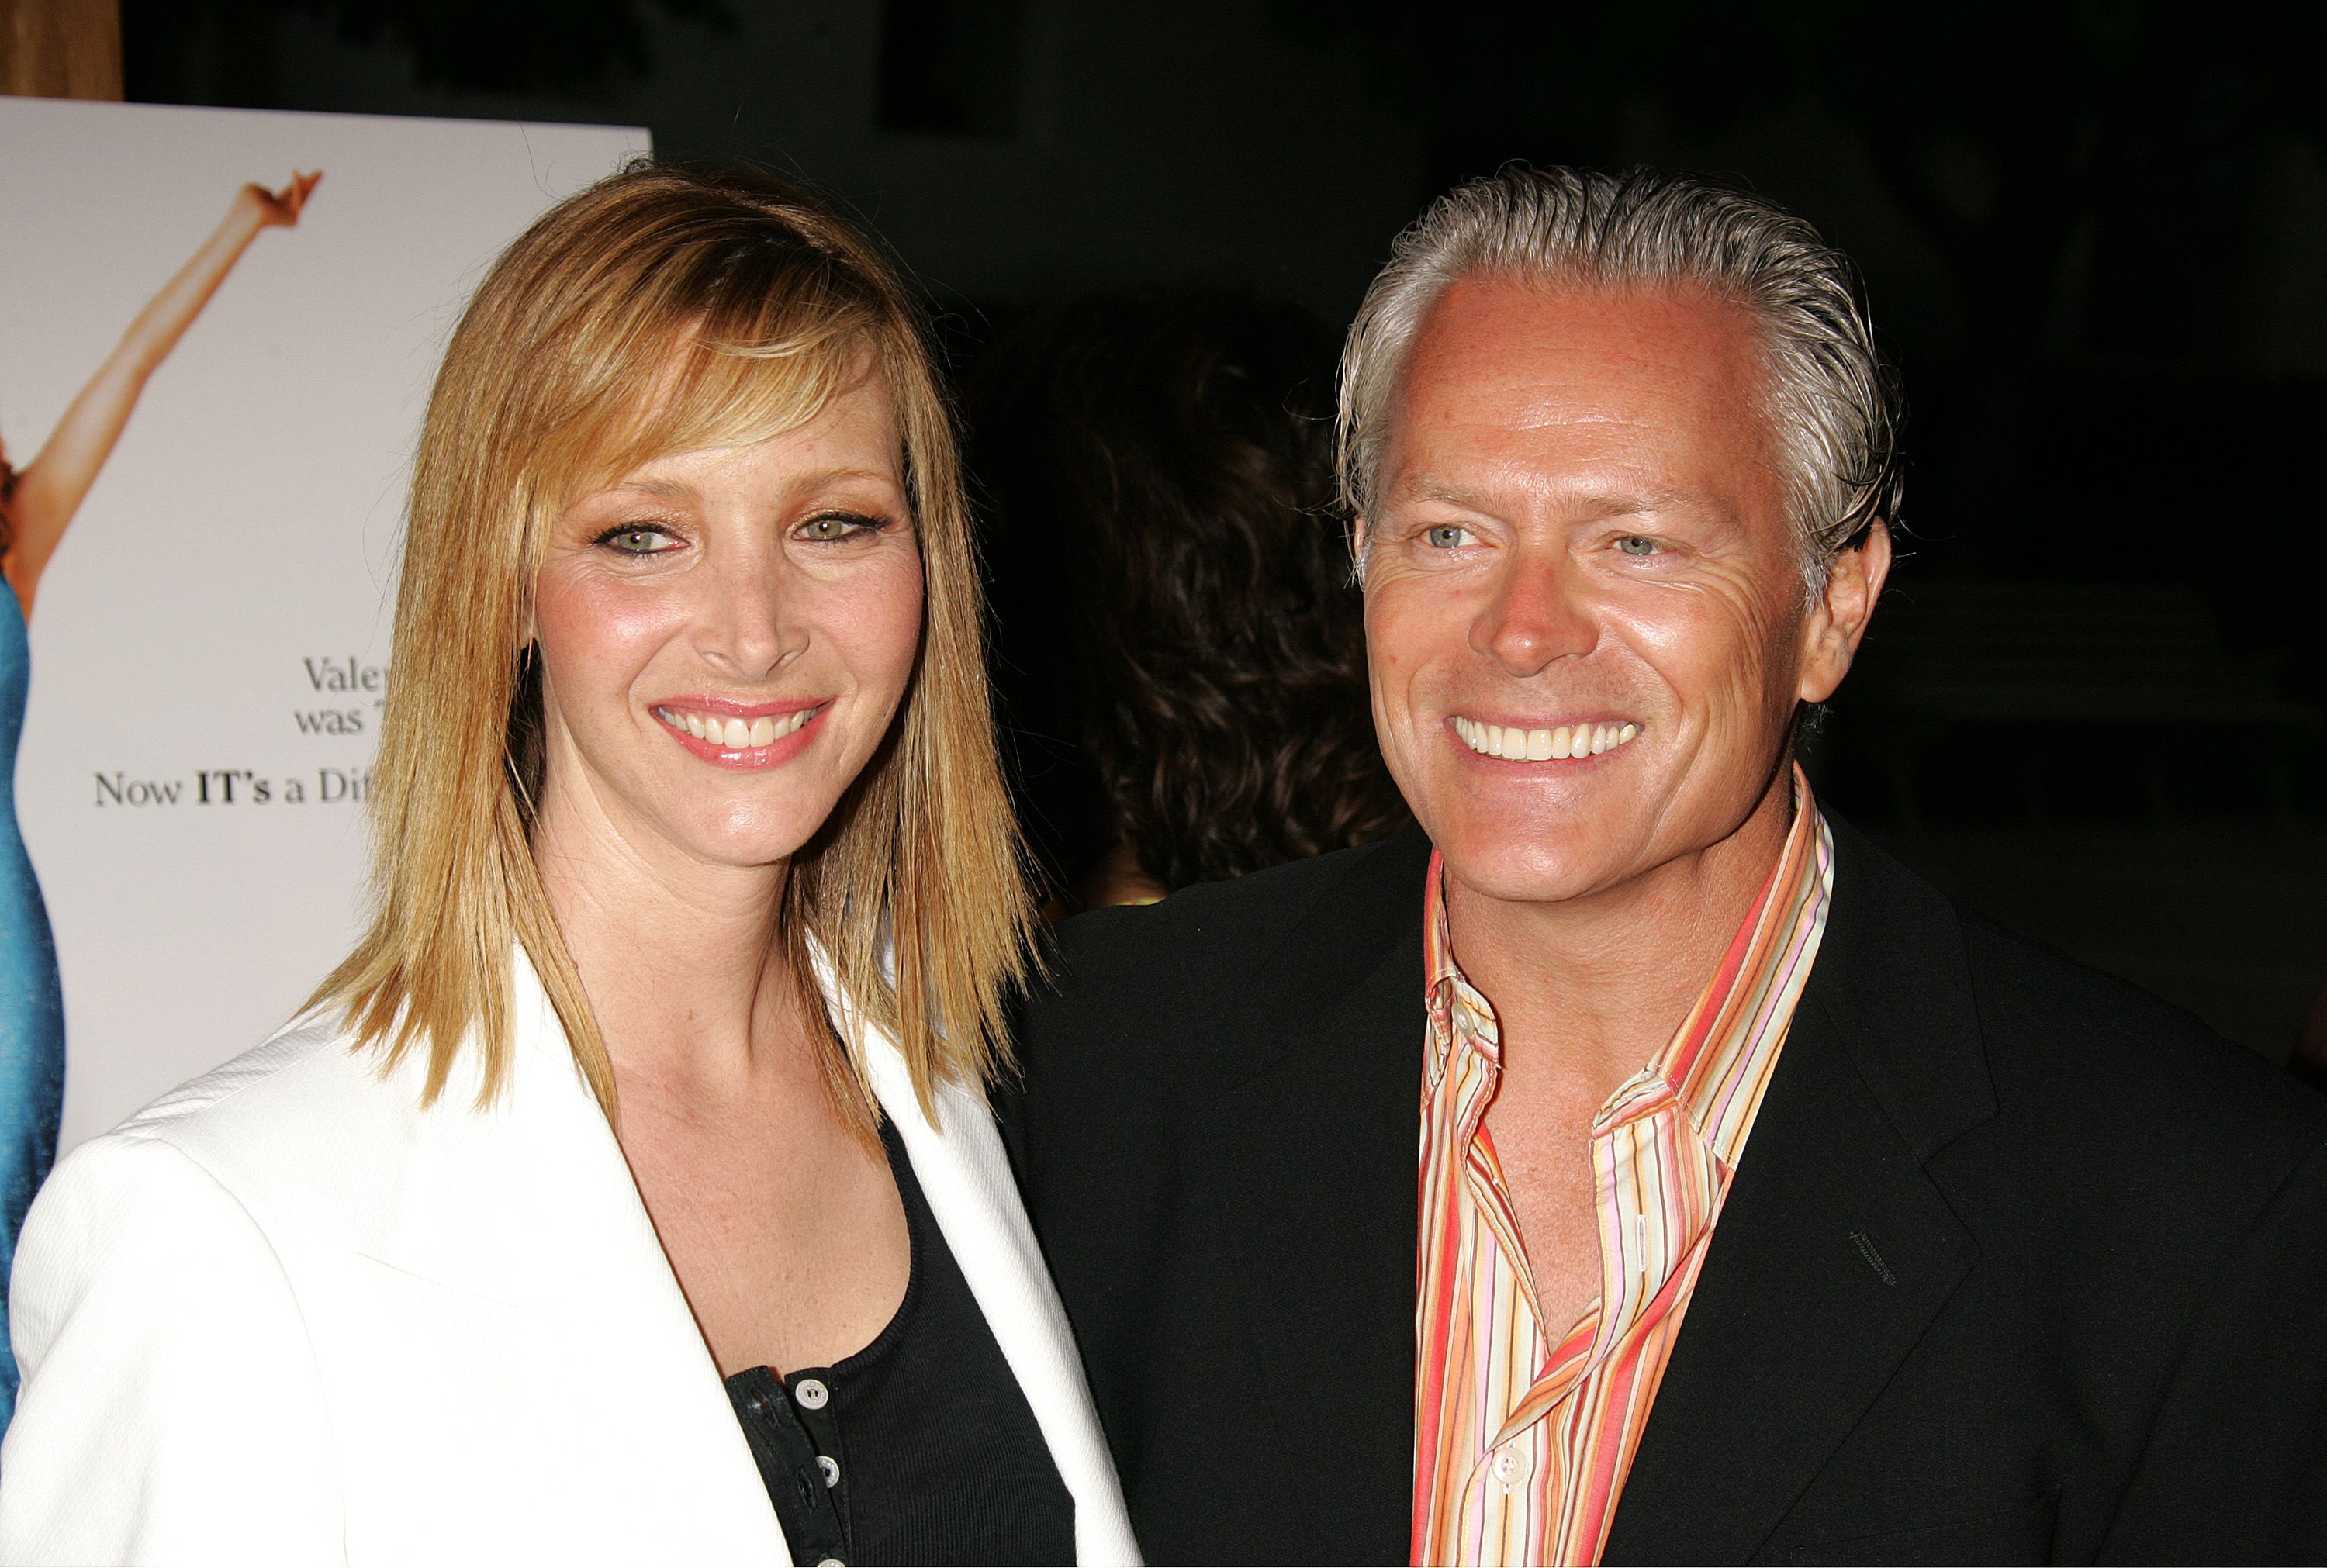 Michel Stern with his wife Lisa Kudrow at an event with smiles on their faces